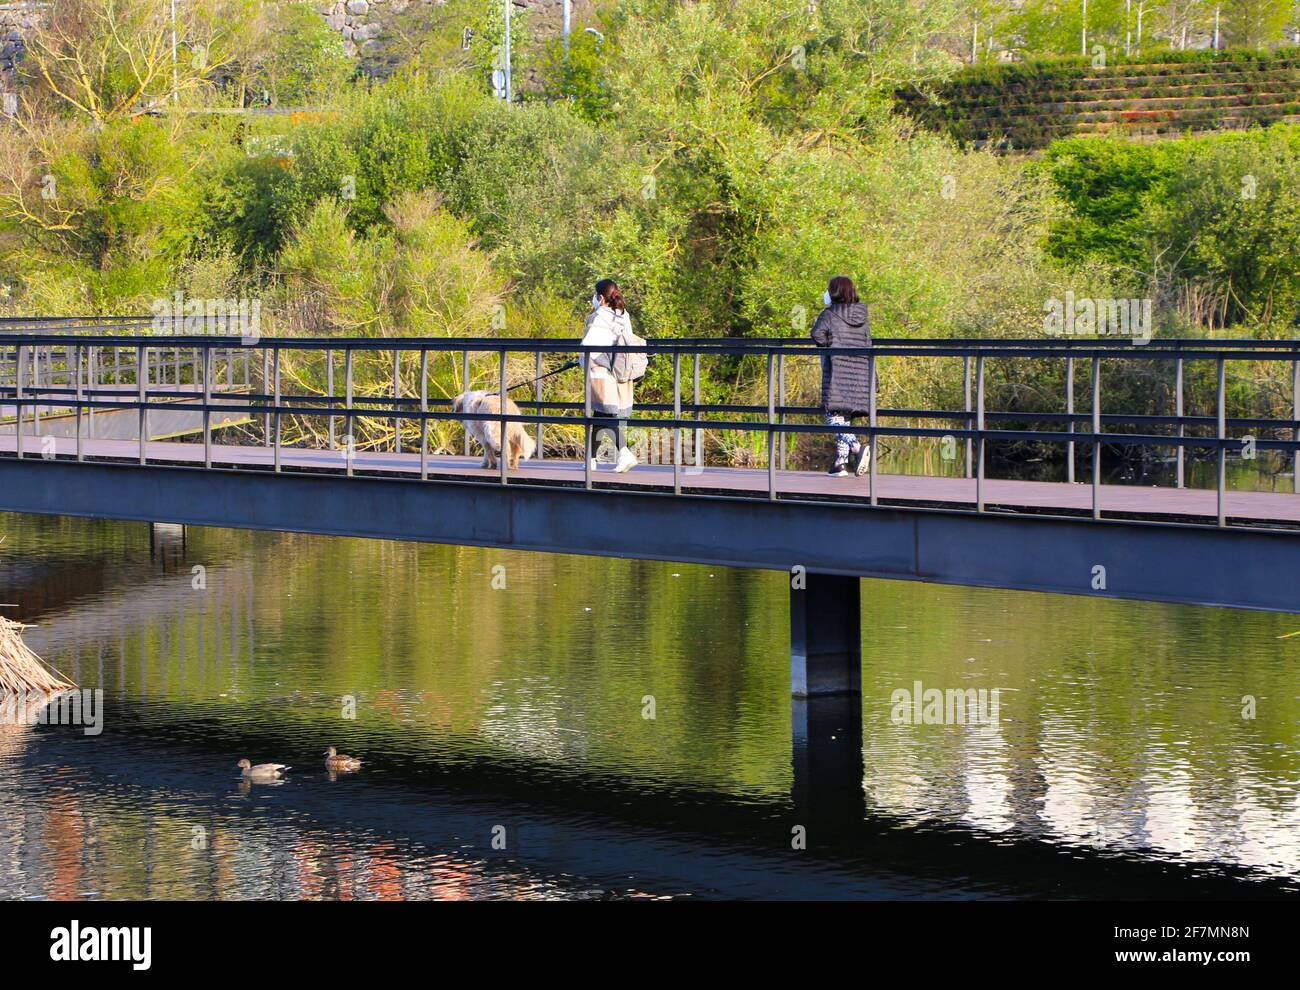 Two women and a dog walking on long footbridge with wooden planks and metal fences over wetland with reeds Las Llamas Park Santander Spain Spring Stock Photo